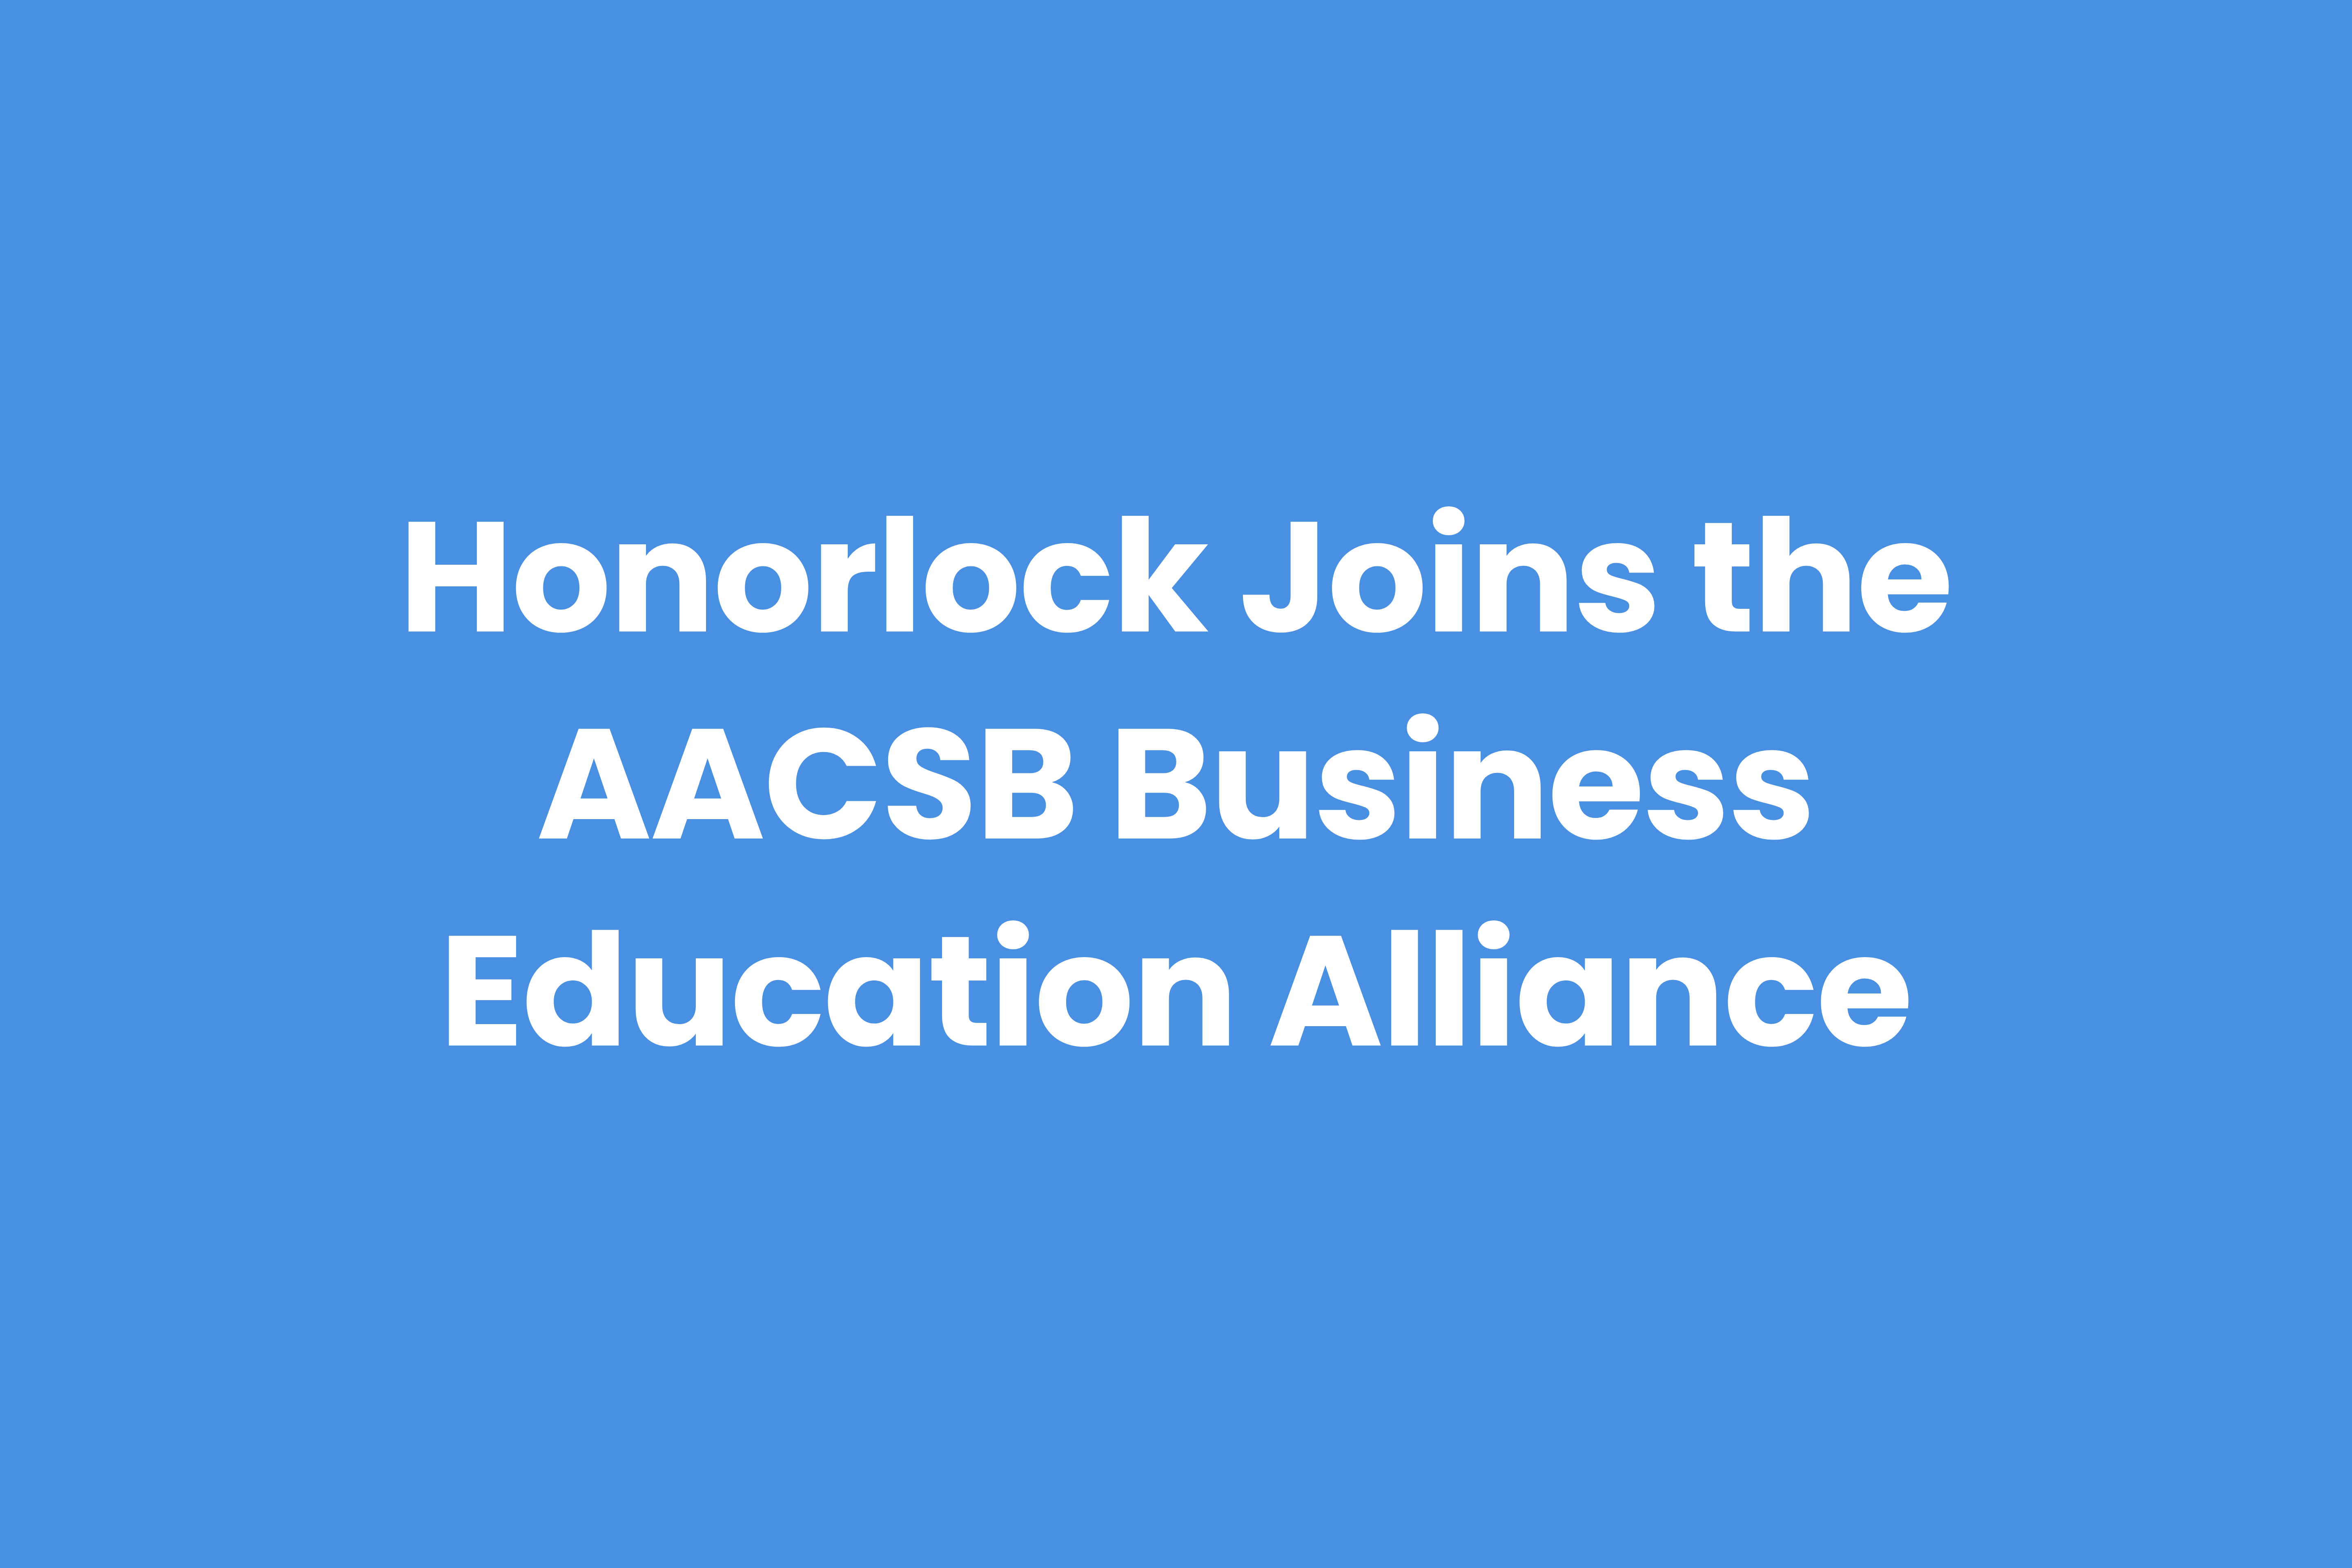 Honorlock Joins the AACSB Business Education Alliance Honorlock